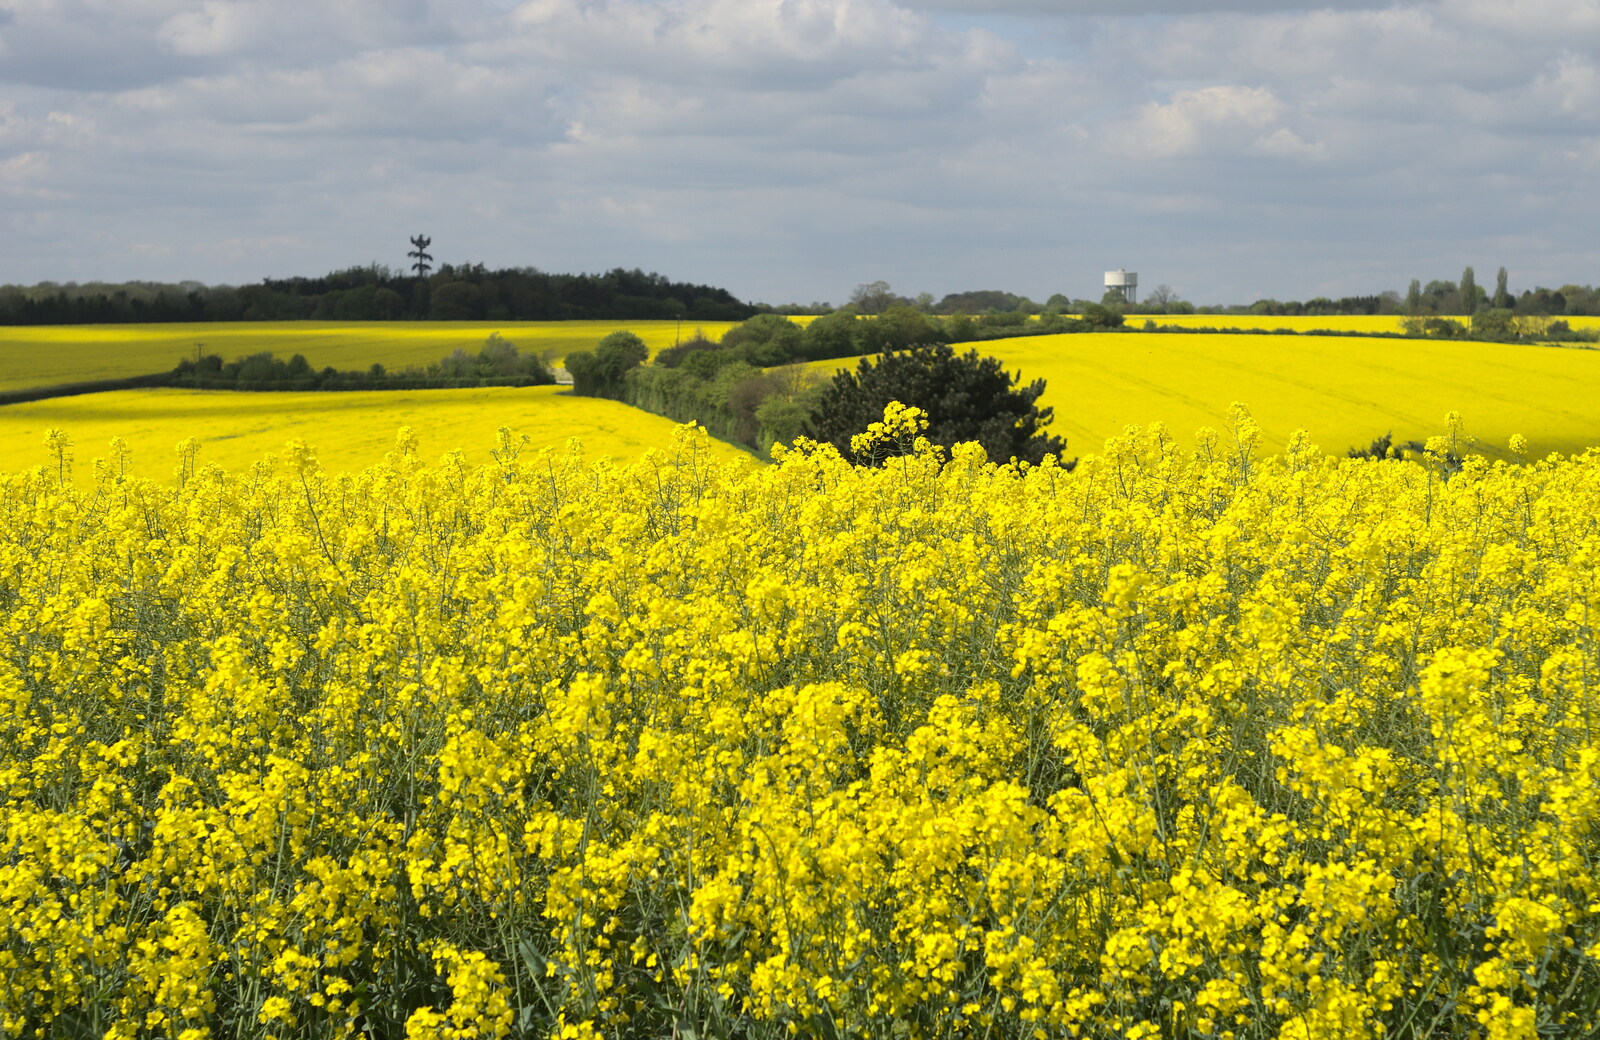 A vast swathe of yellow oilseed rape from The BSCC Cycling Weekend, The Swan Inn, Thaxted, Essex - 12th May 2012